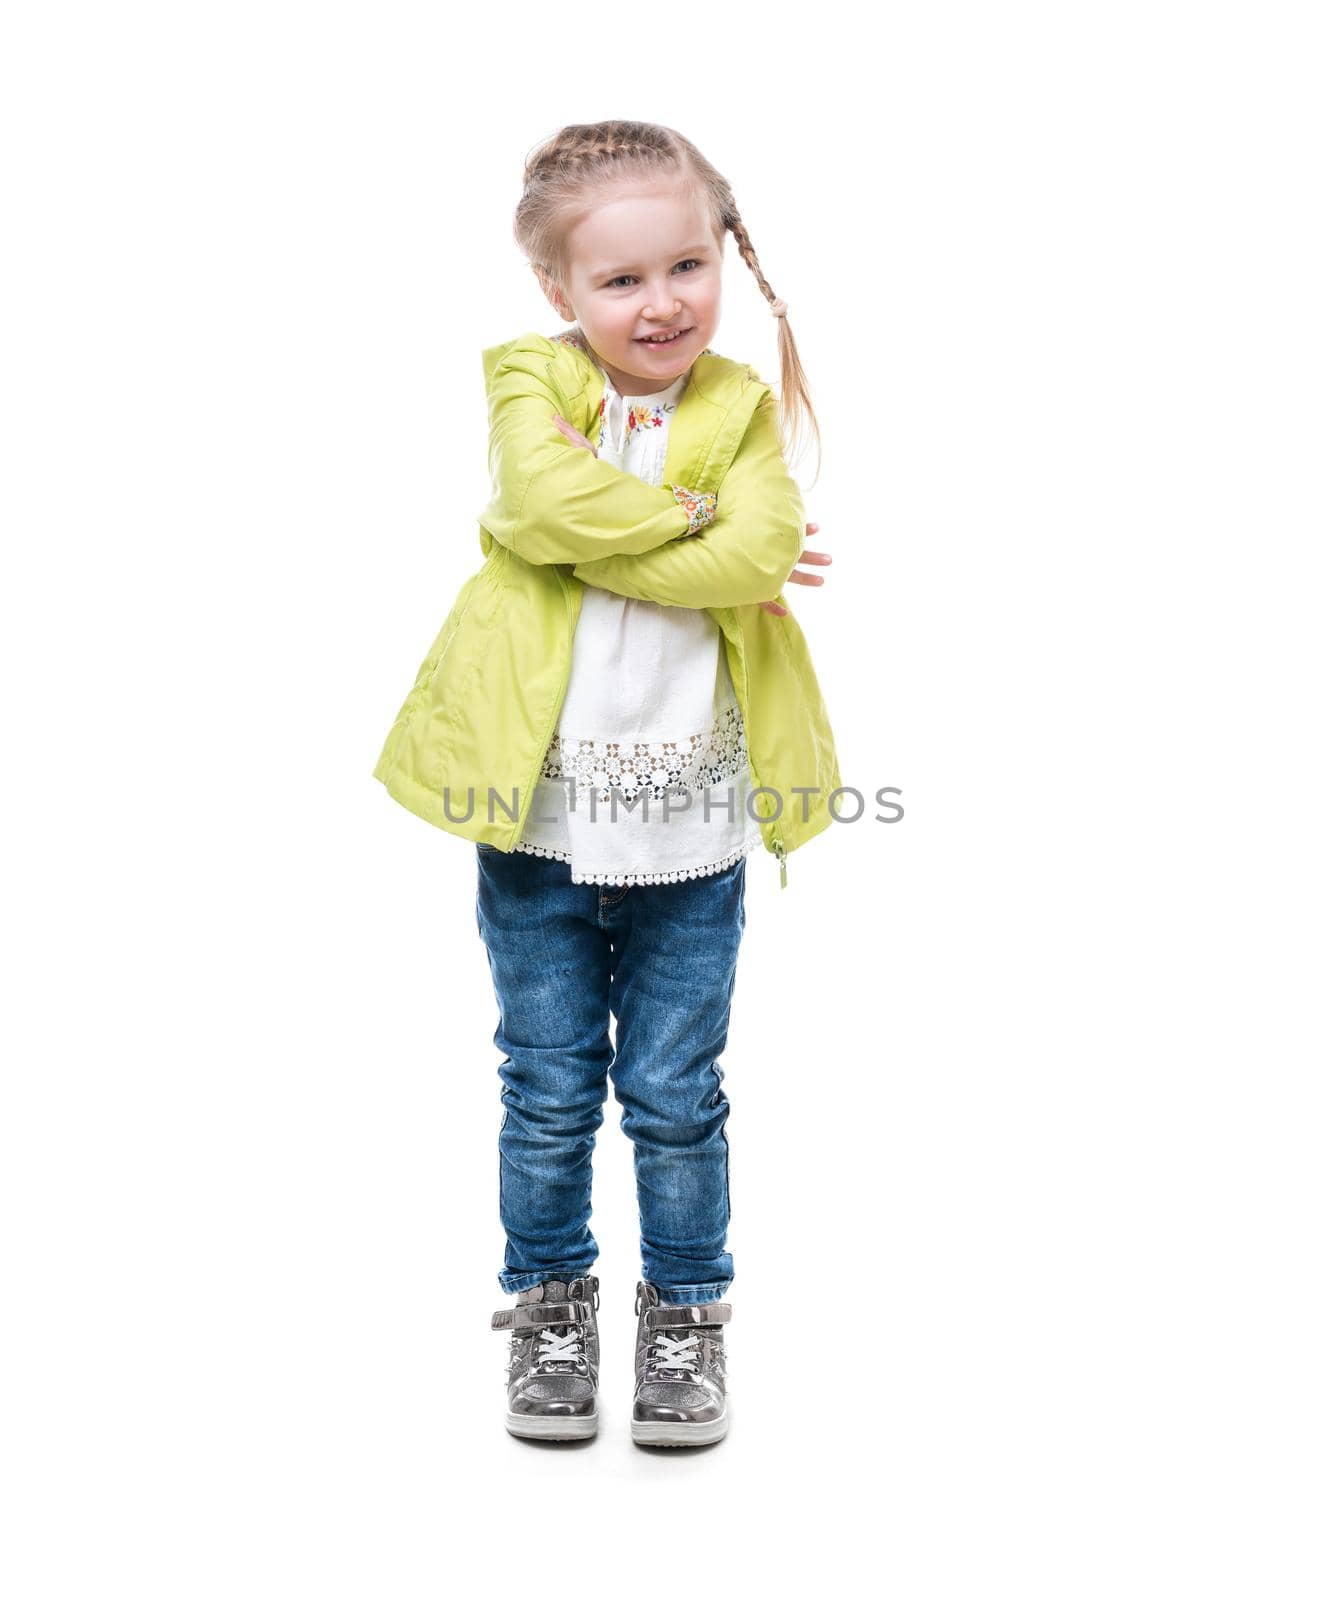 girl hugging herself, isolated on white background by tan4ikk1